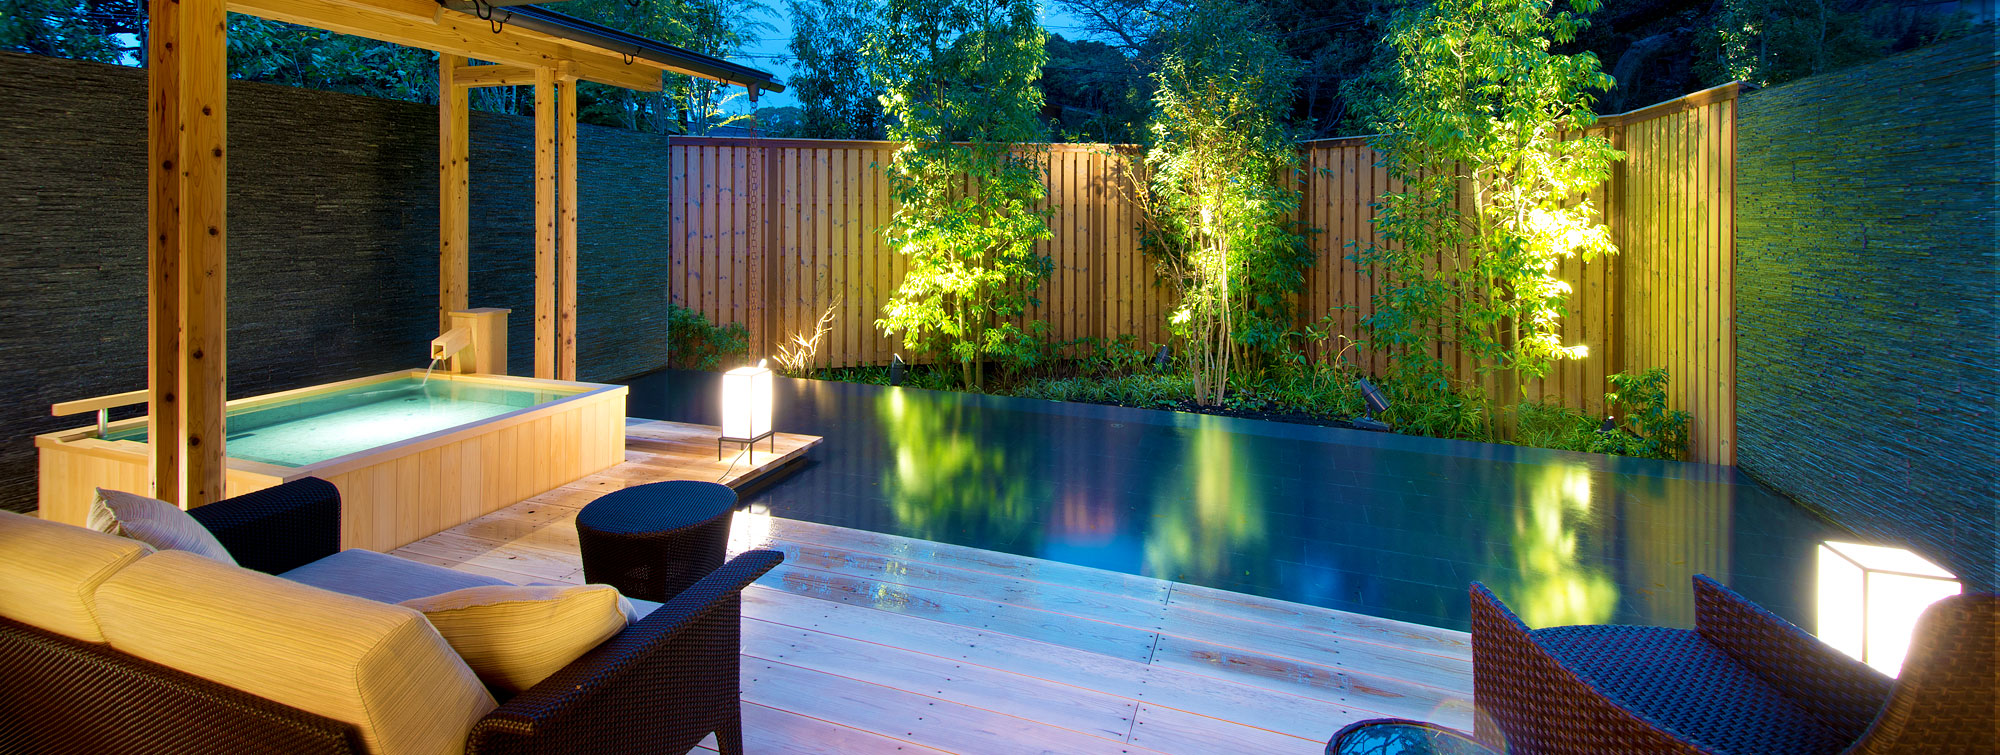 Water feature in the garden and outdoor private bath - A moment of peace